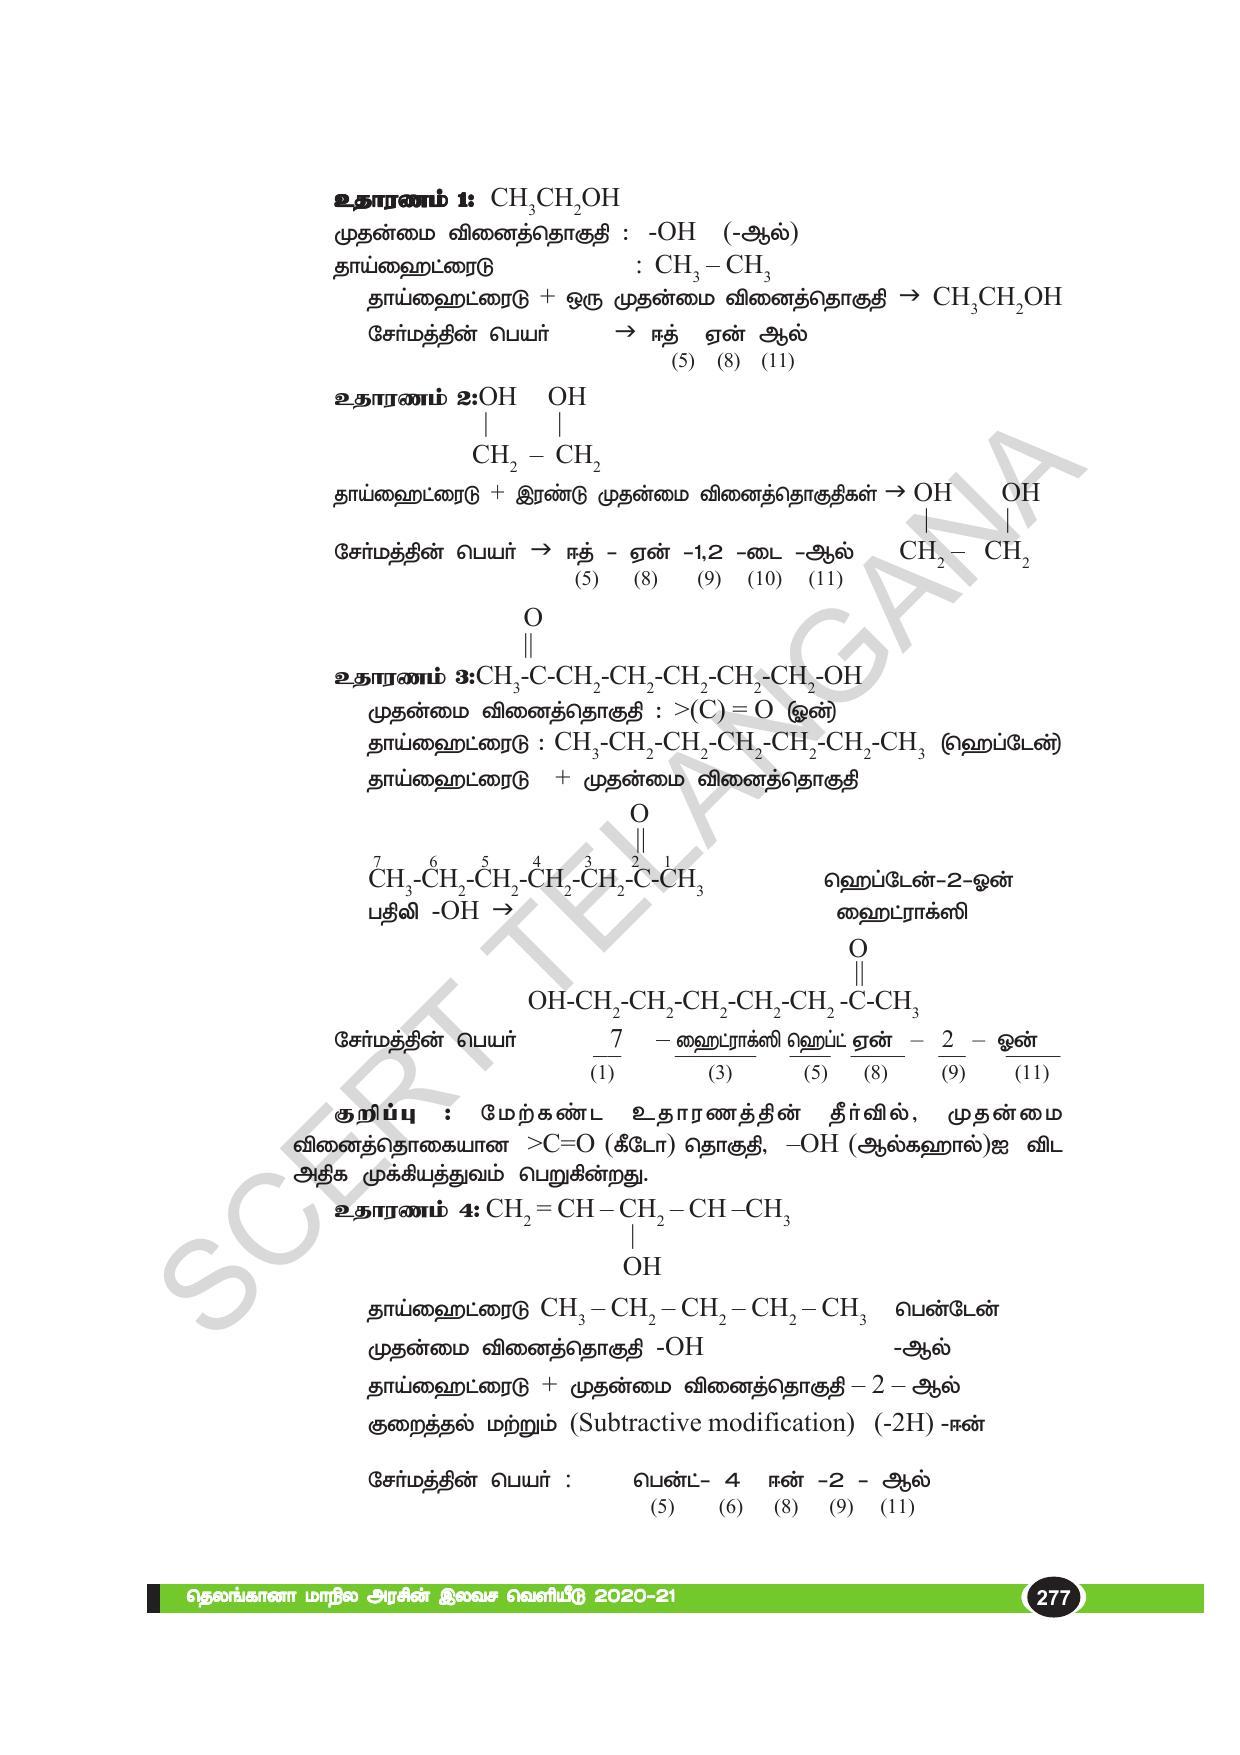 TS SCERT Class 10 Physical Science(Tamil Medium) Text Book - Page 289